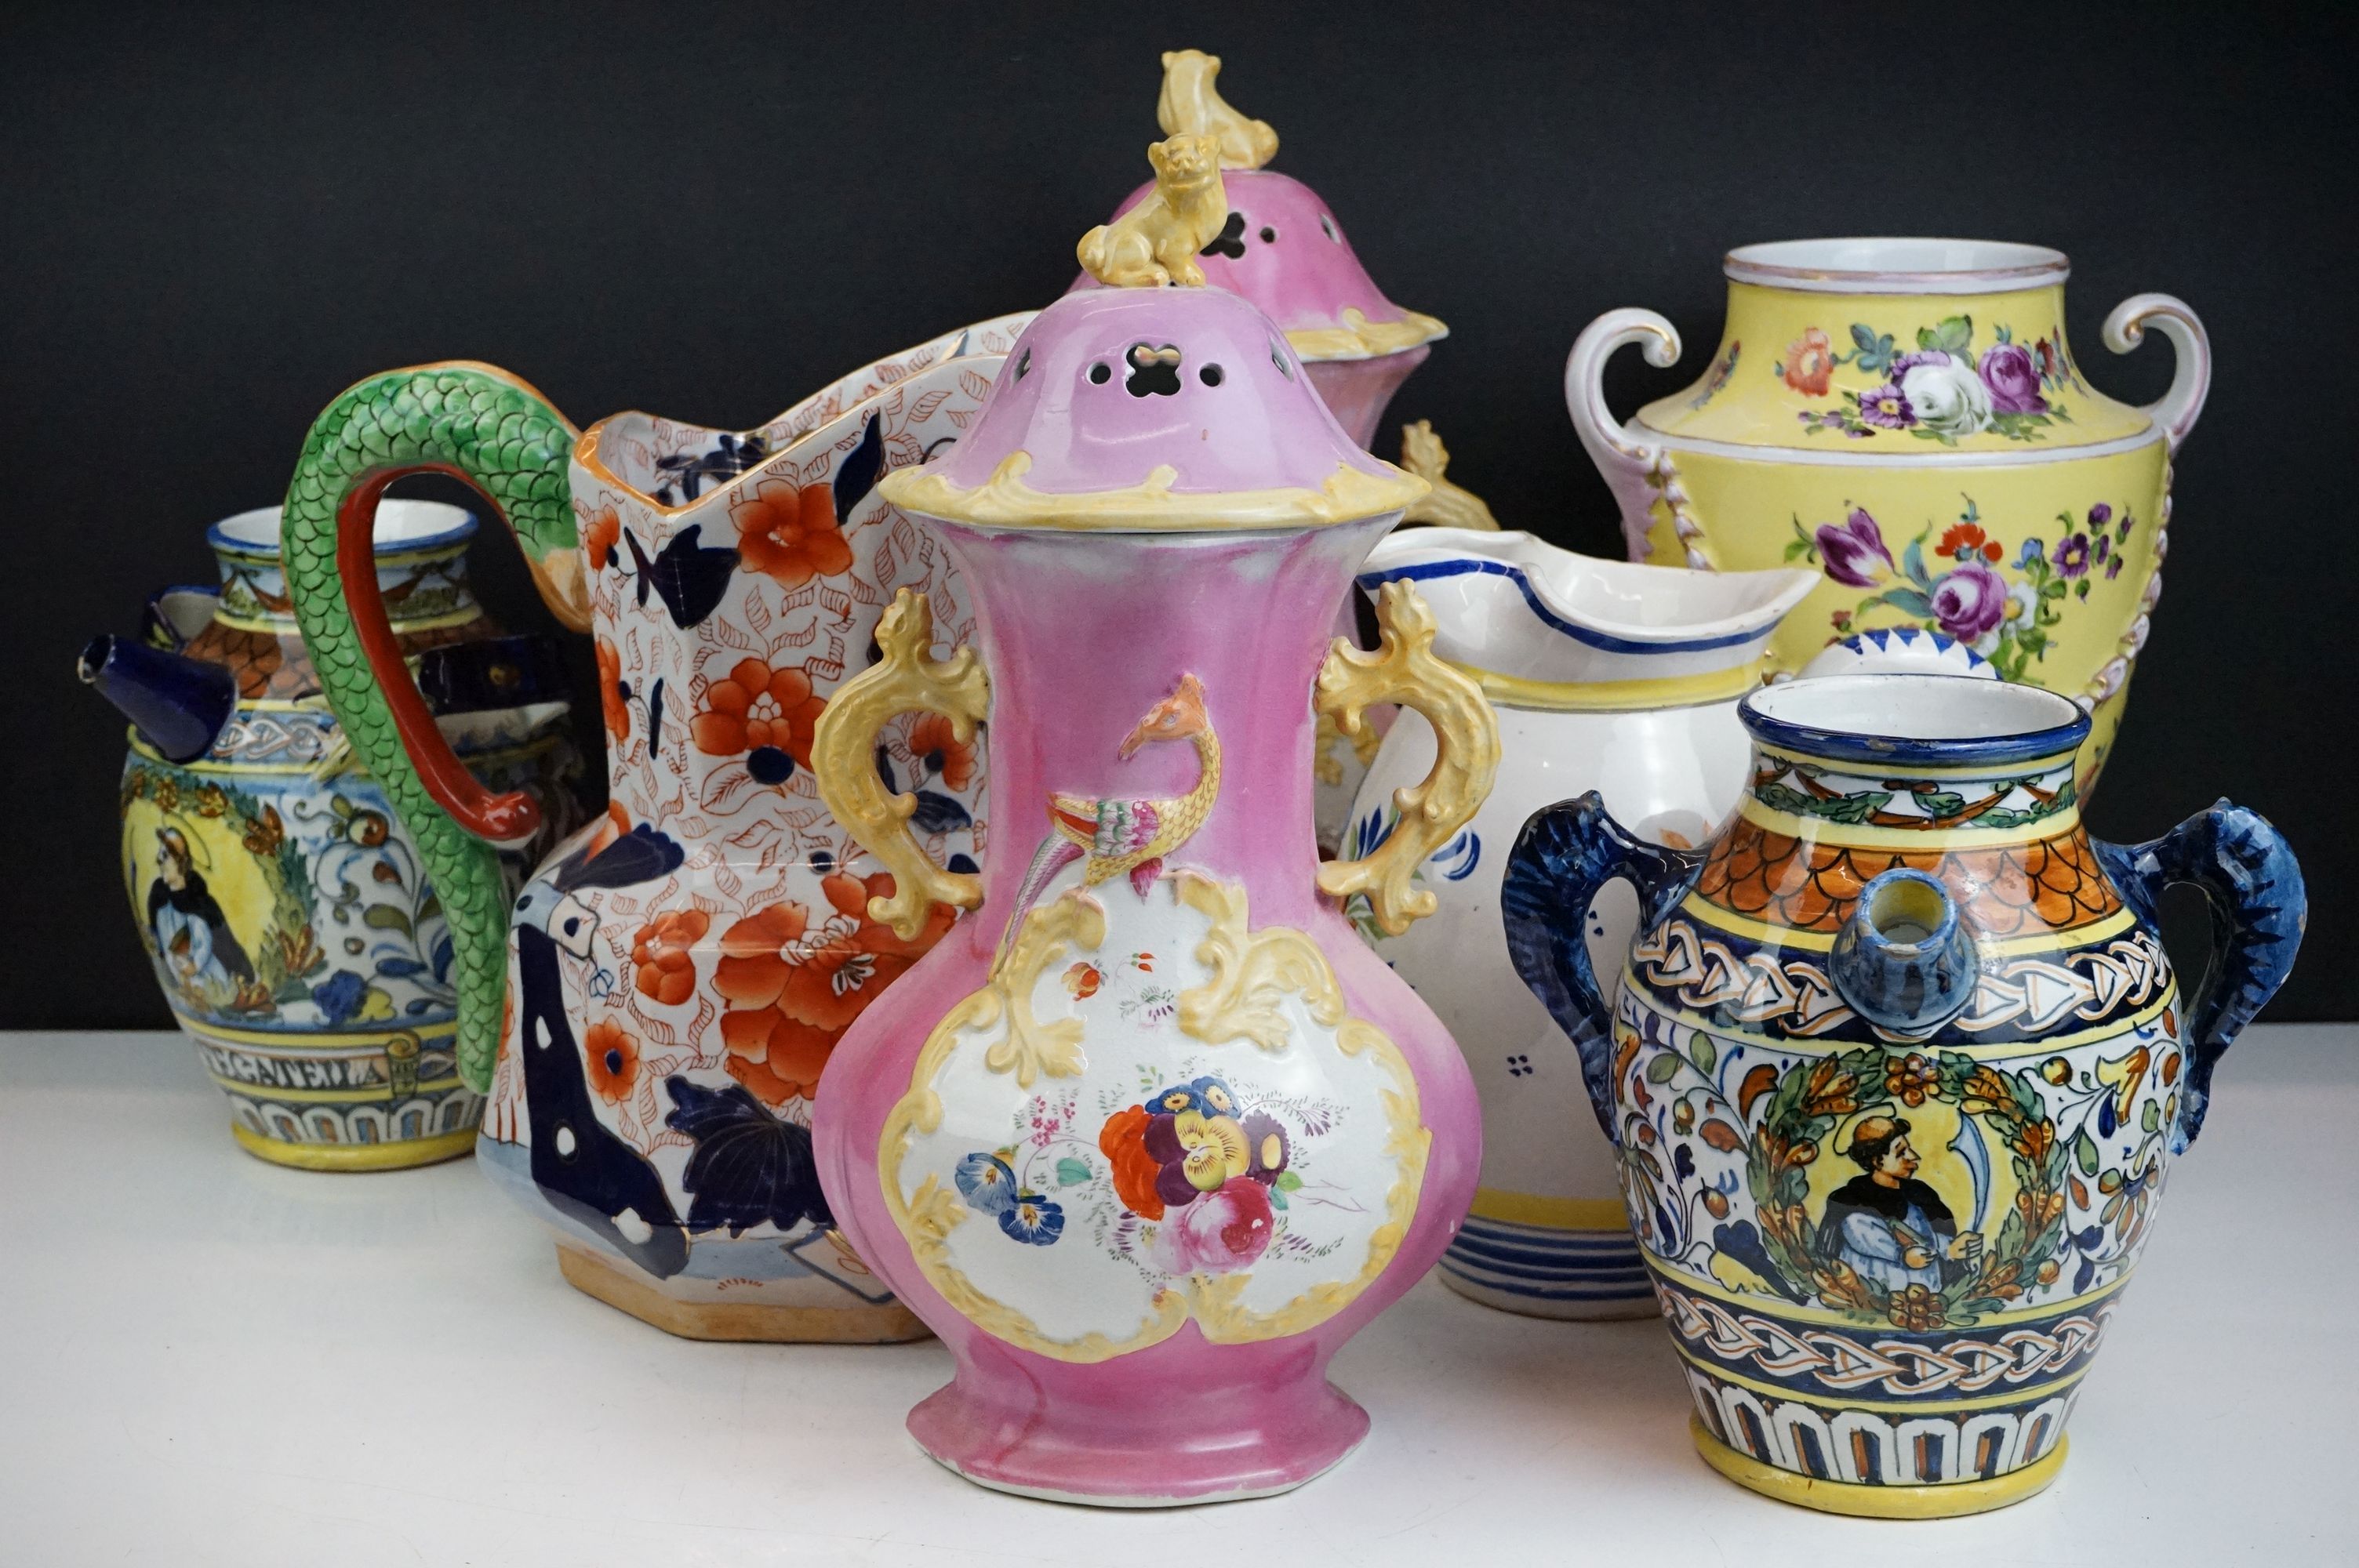 Collection of pottery and porcelain to include: Quimper Pottery jug, signed 'Henriot Quimper